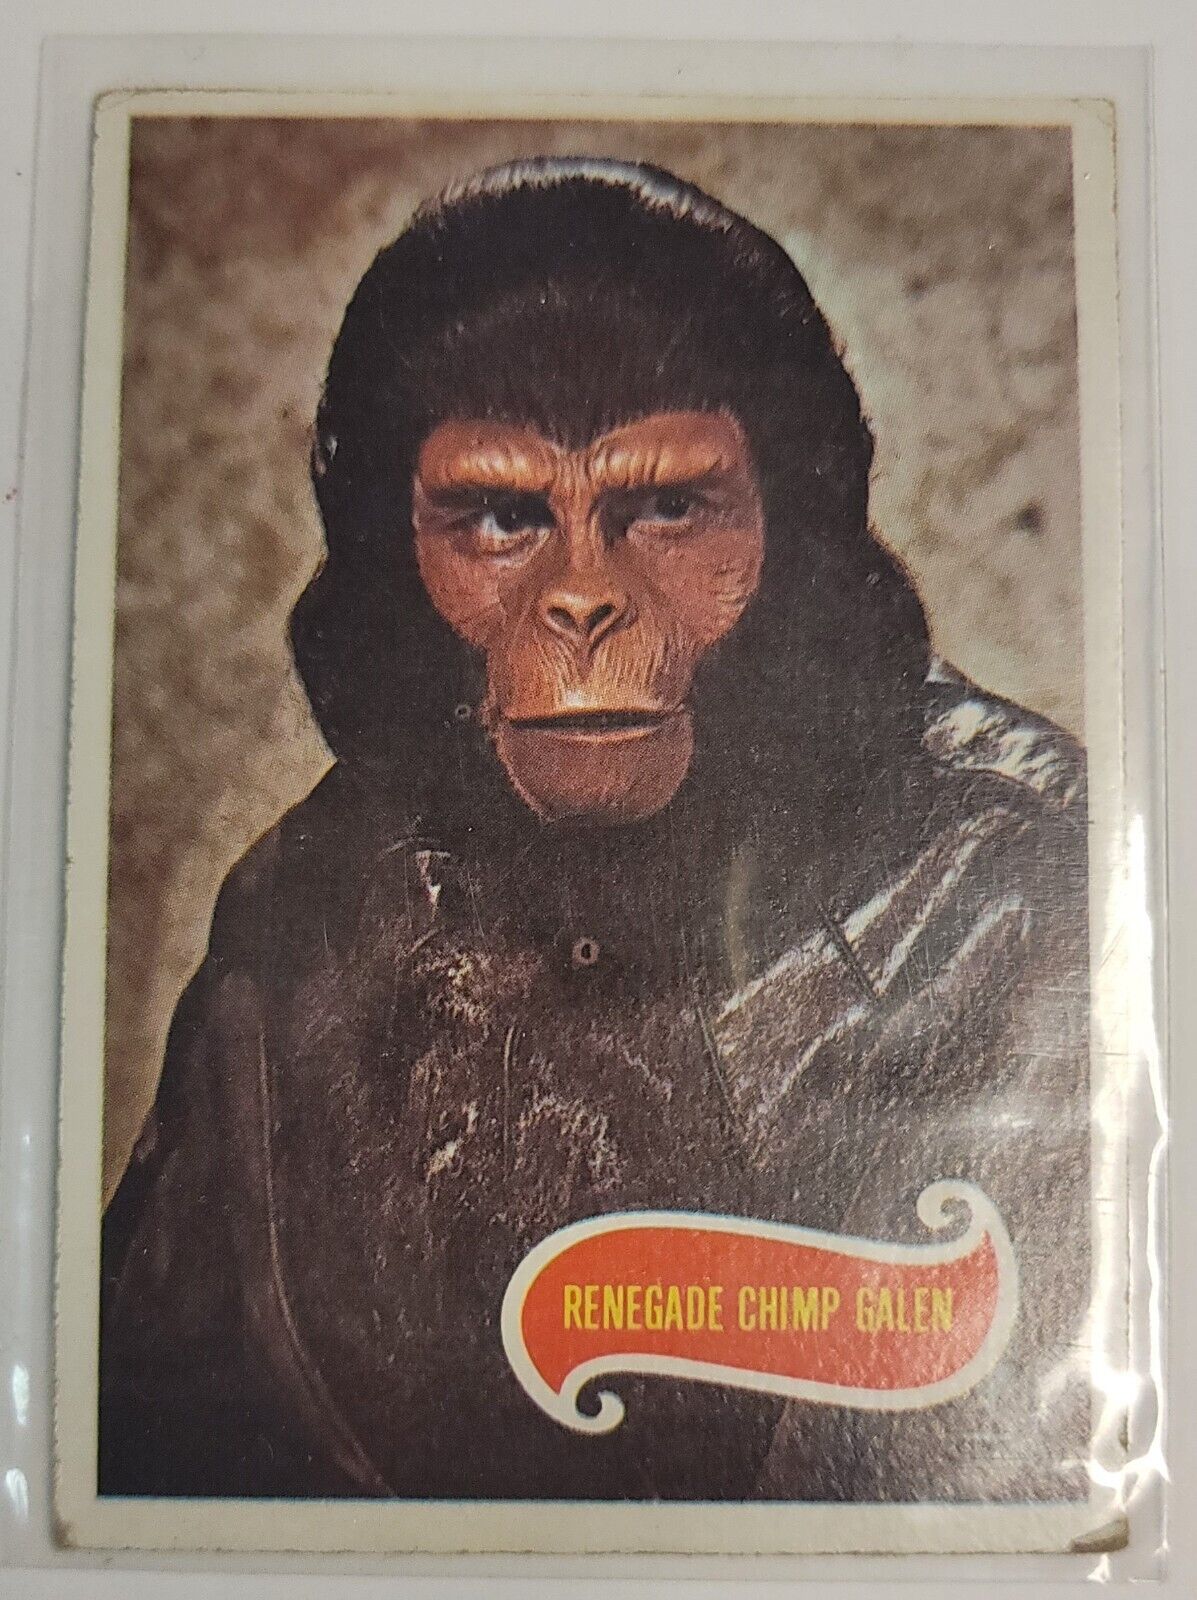 1967 Apjac, Planet of the Apes Television Show, Trading Cards - You Pick